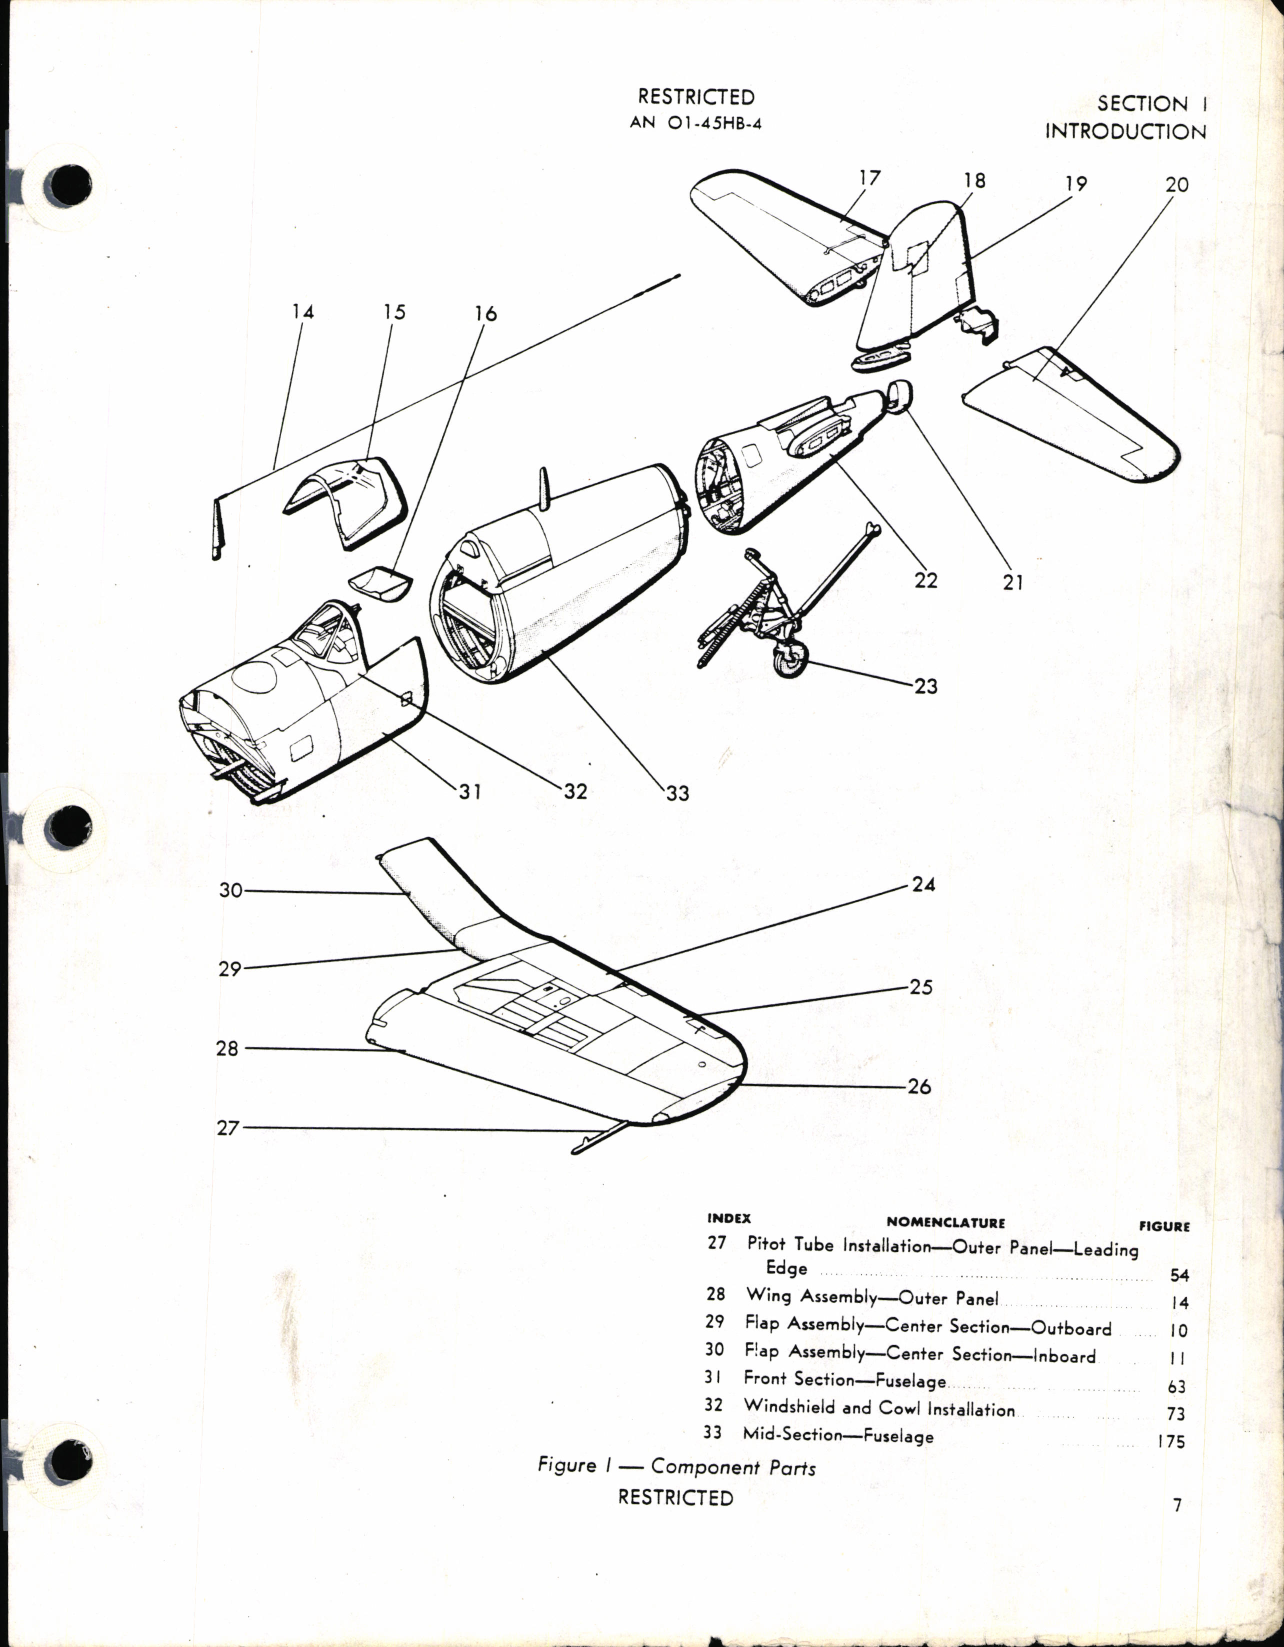 Sample page 15 from AirCorps Library document: Parts Catalog for F4U-4 and F4U-4B Airplanes